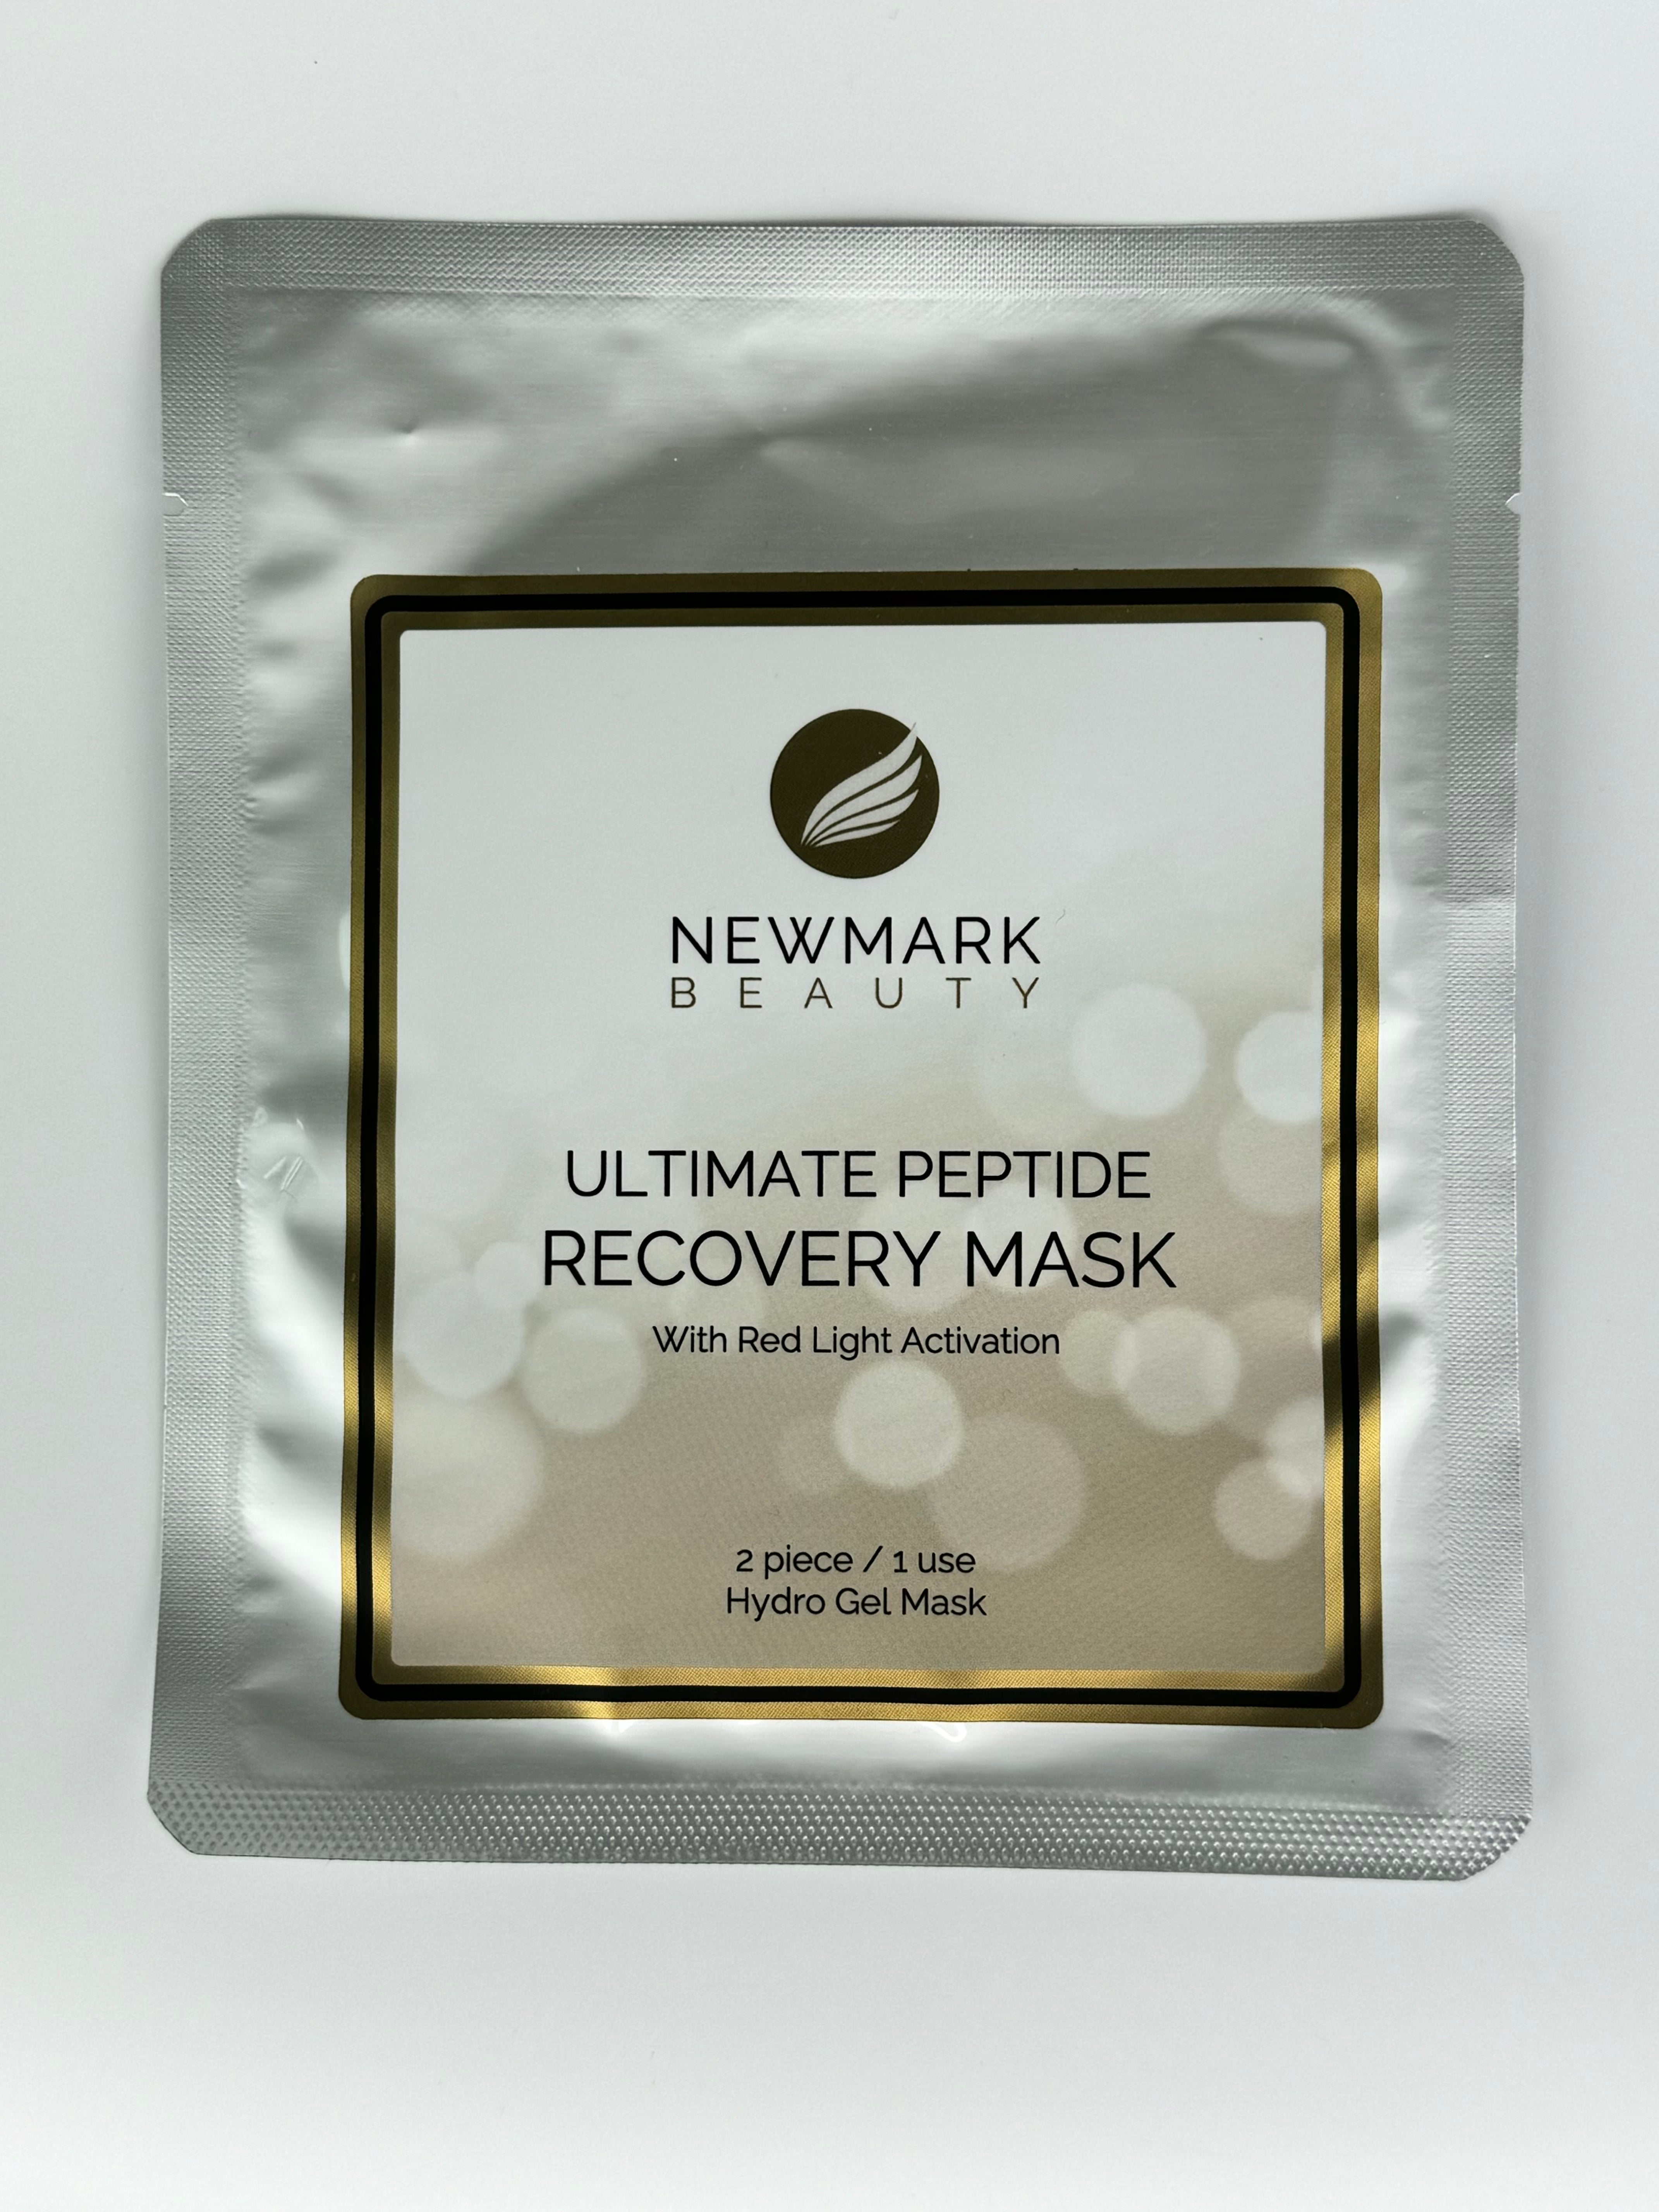 Ultimate Peptide Recovery Mask by Newmark Beauty